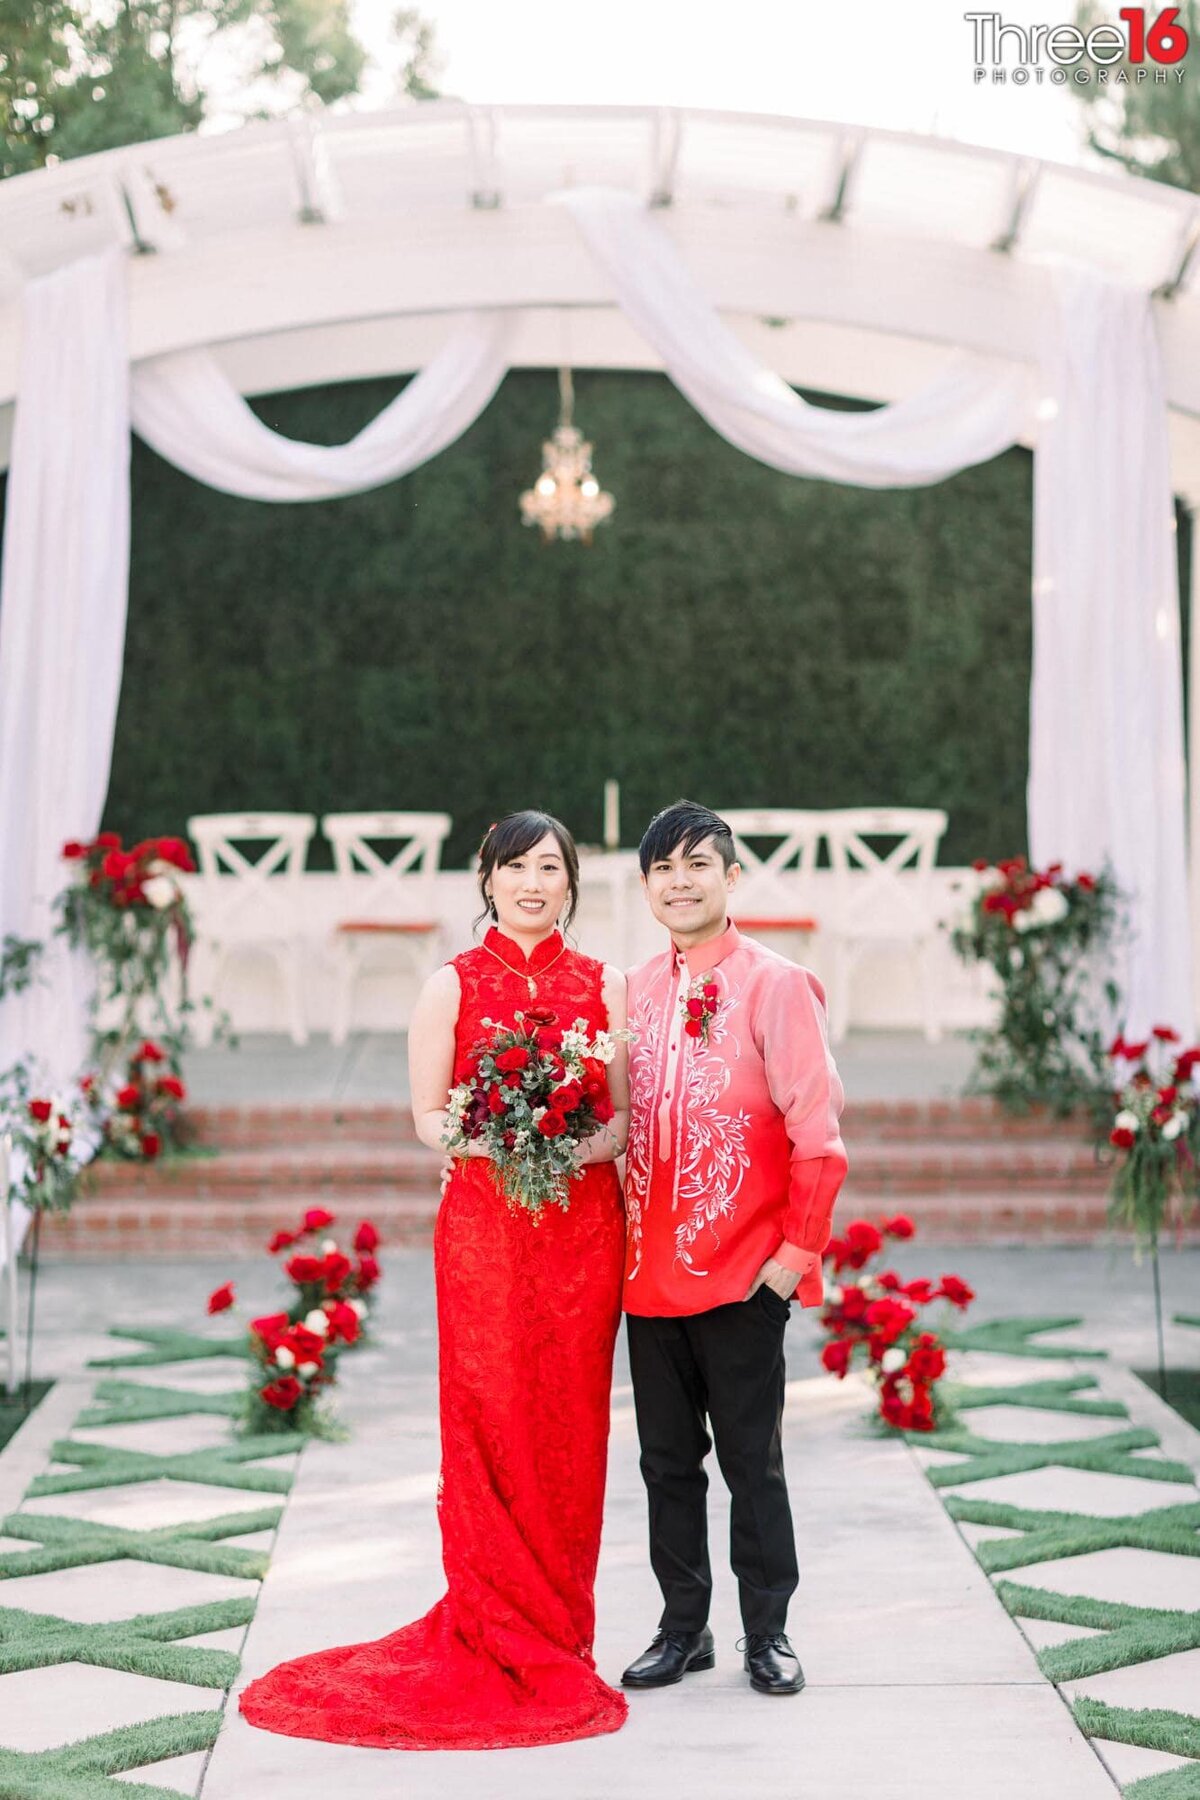 Bride and Groom wearing red attire pose together on the aisle